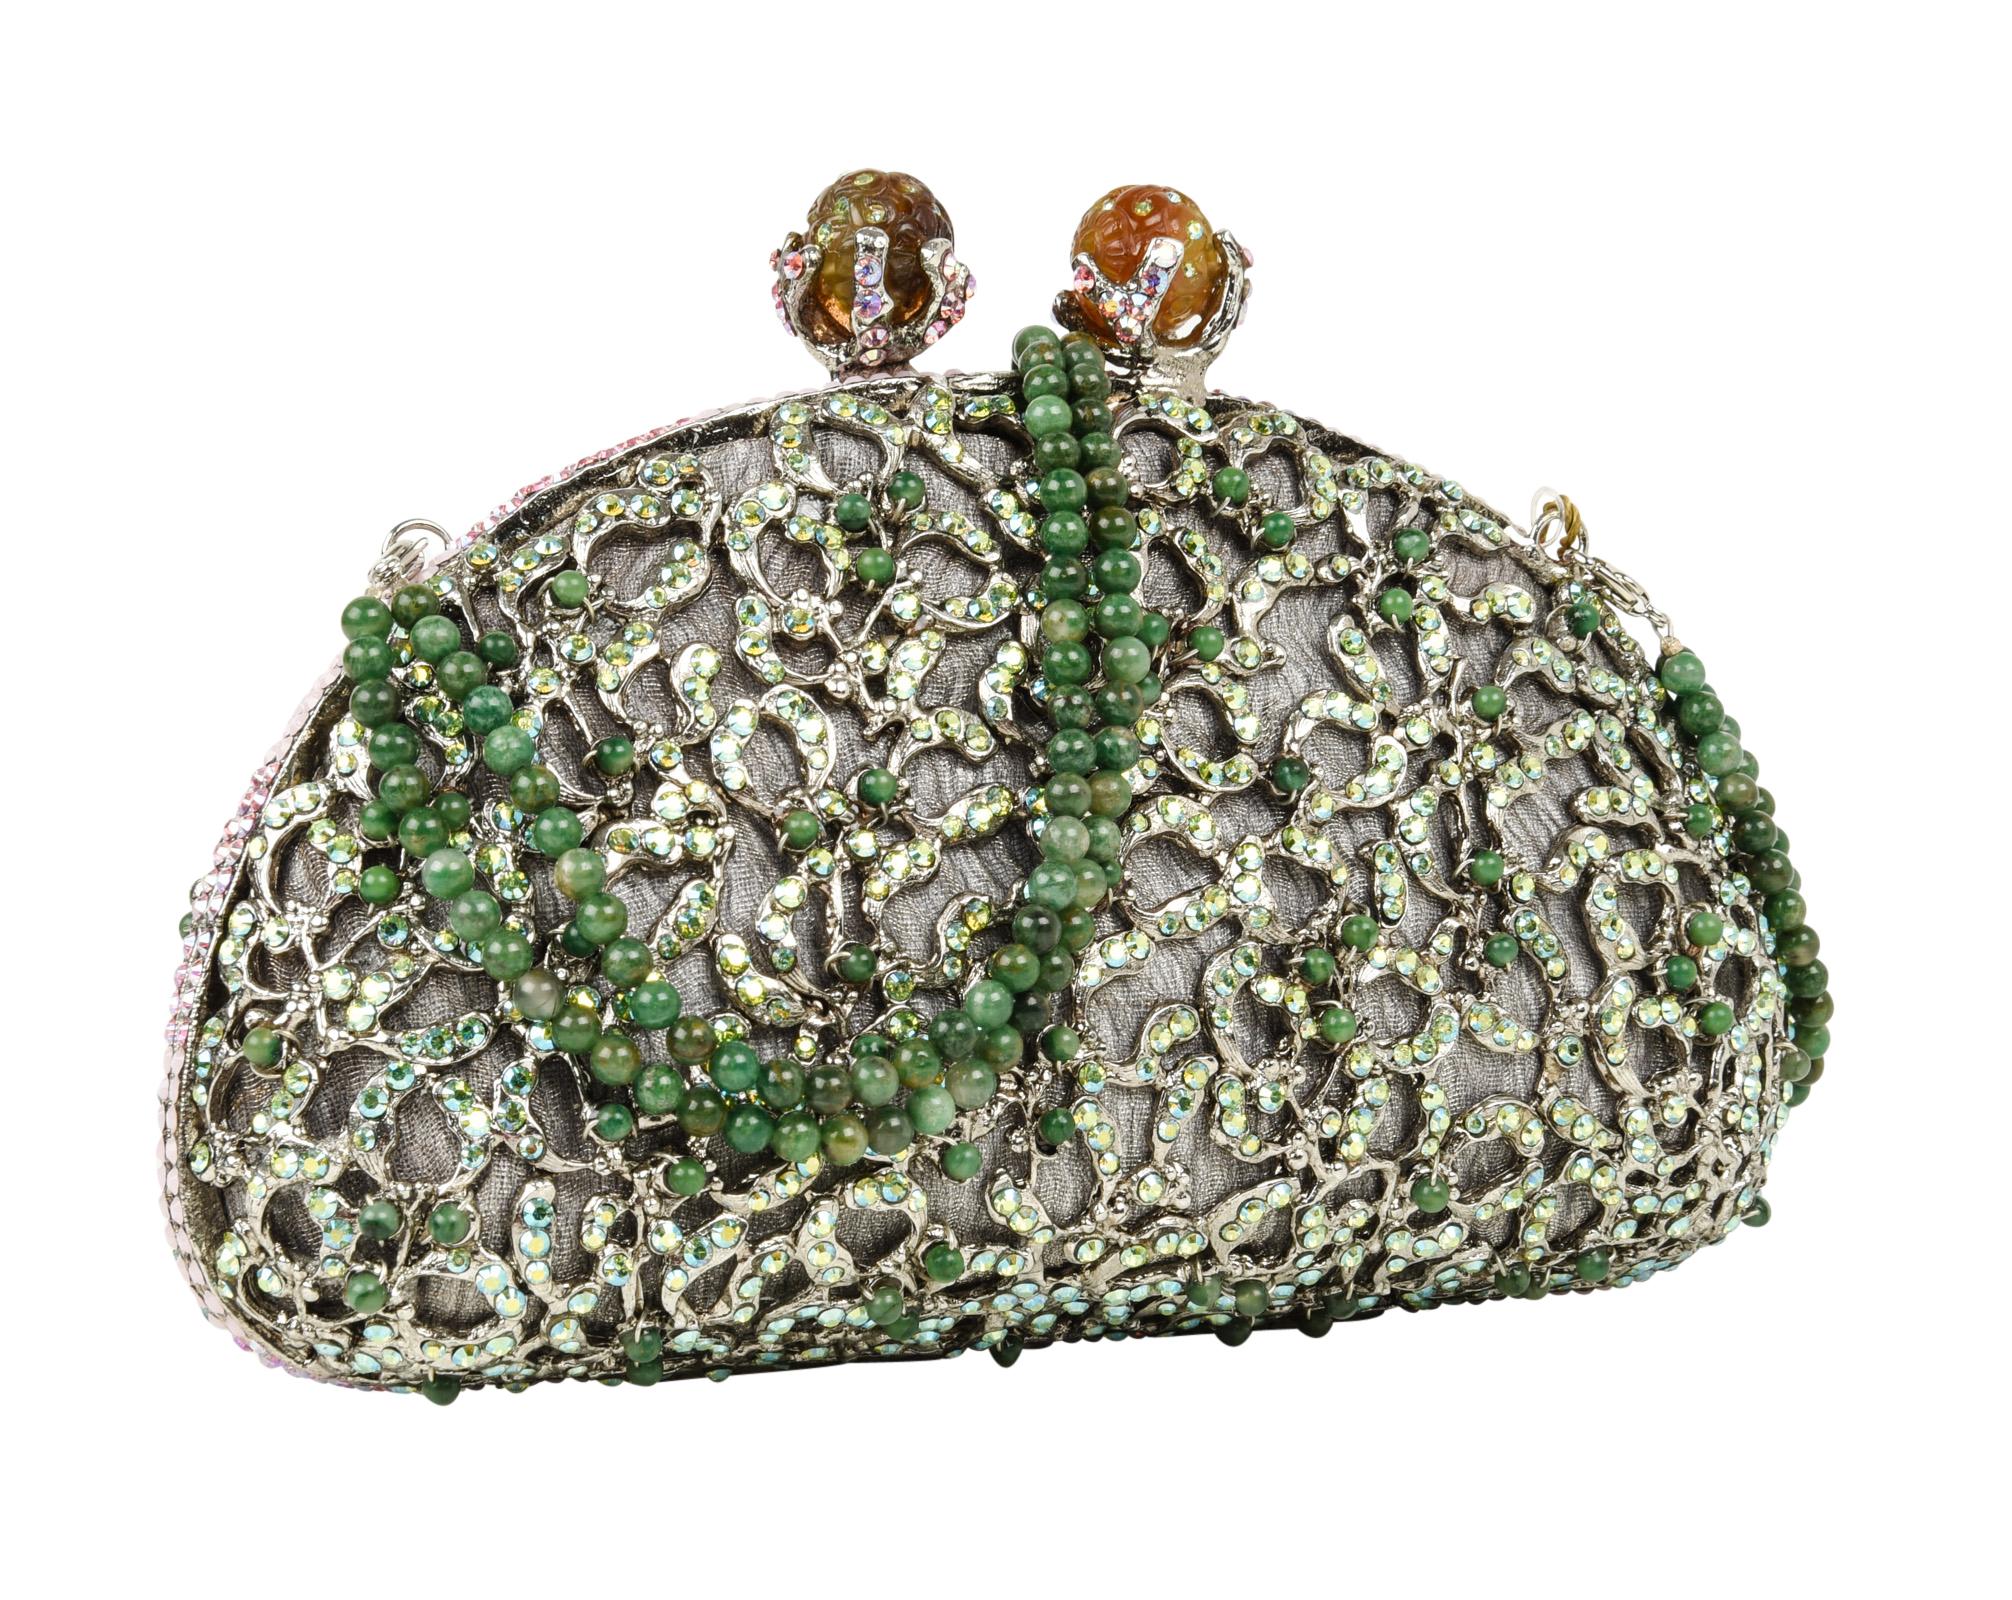 Exquisite hand-made evening purse encrusted with approximately 2000 crystals evening bag.
Jade beading set on wiring.
Beaded jade double strand handle is removable adding versatility to this clutch / handbag.
Lined in finely textured pewter